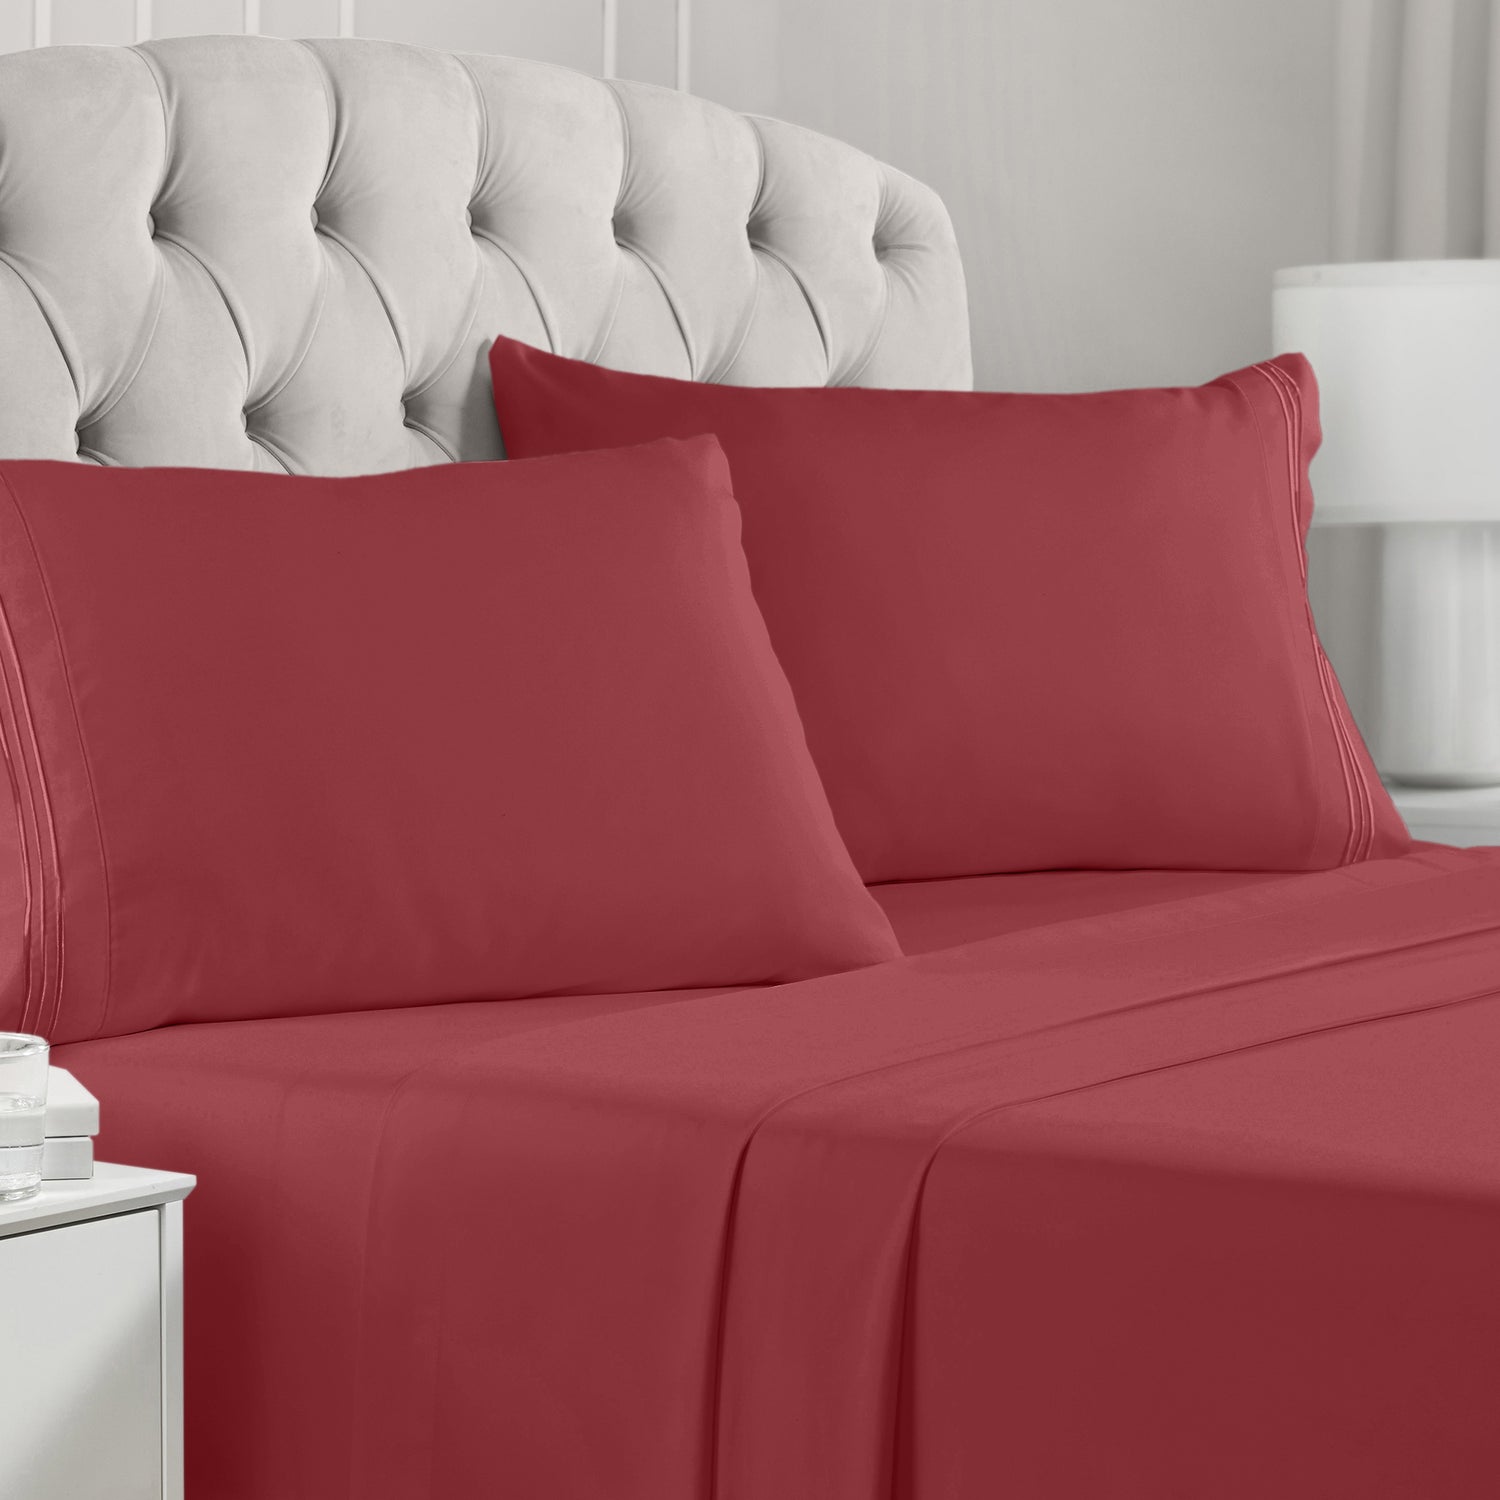 Iconic Collection Microfiber Sheet Set (Dark Colors), 4 Piece